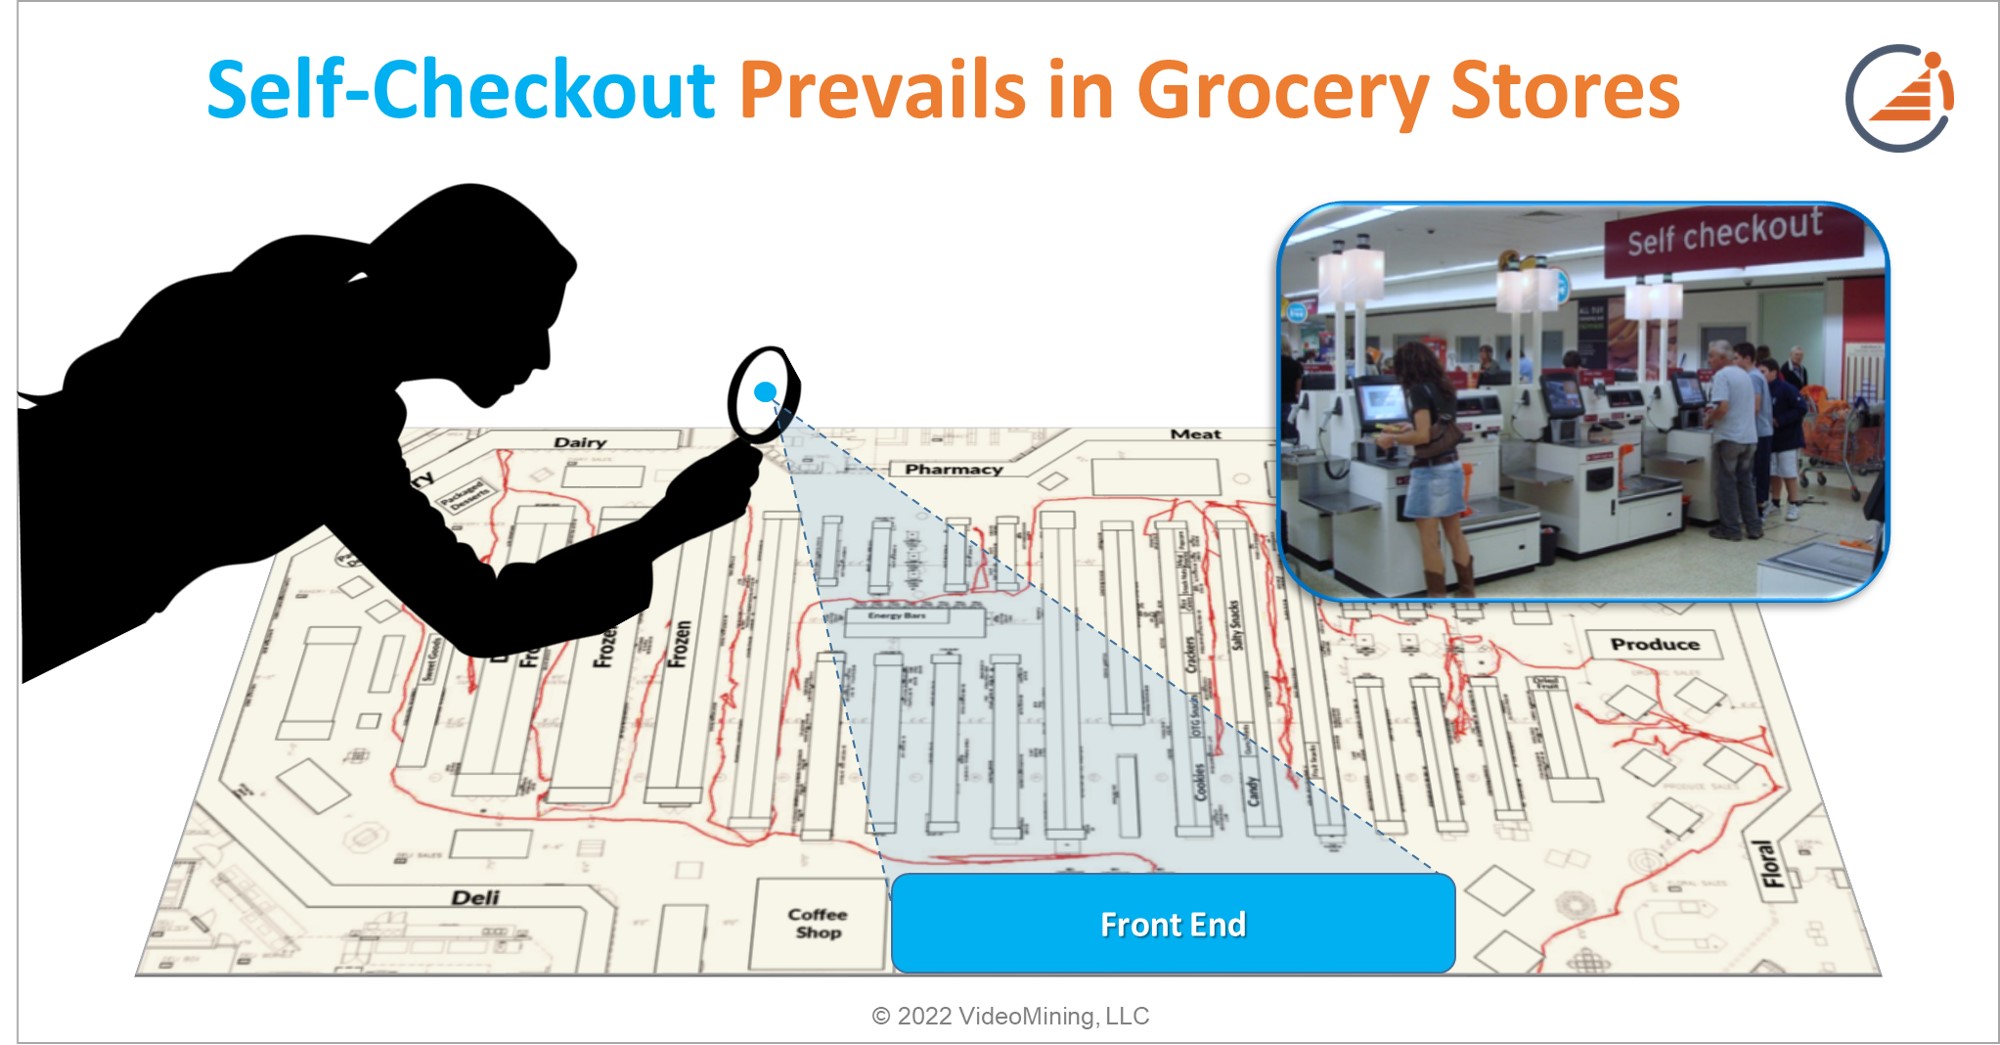 Self-Checkout Prevails in Grocery Stores, but Front End merchandising lags behind